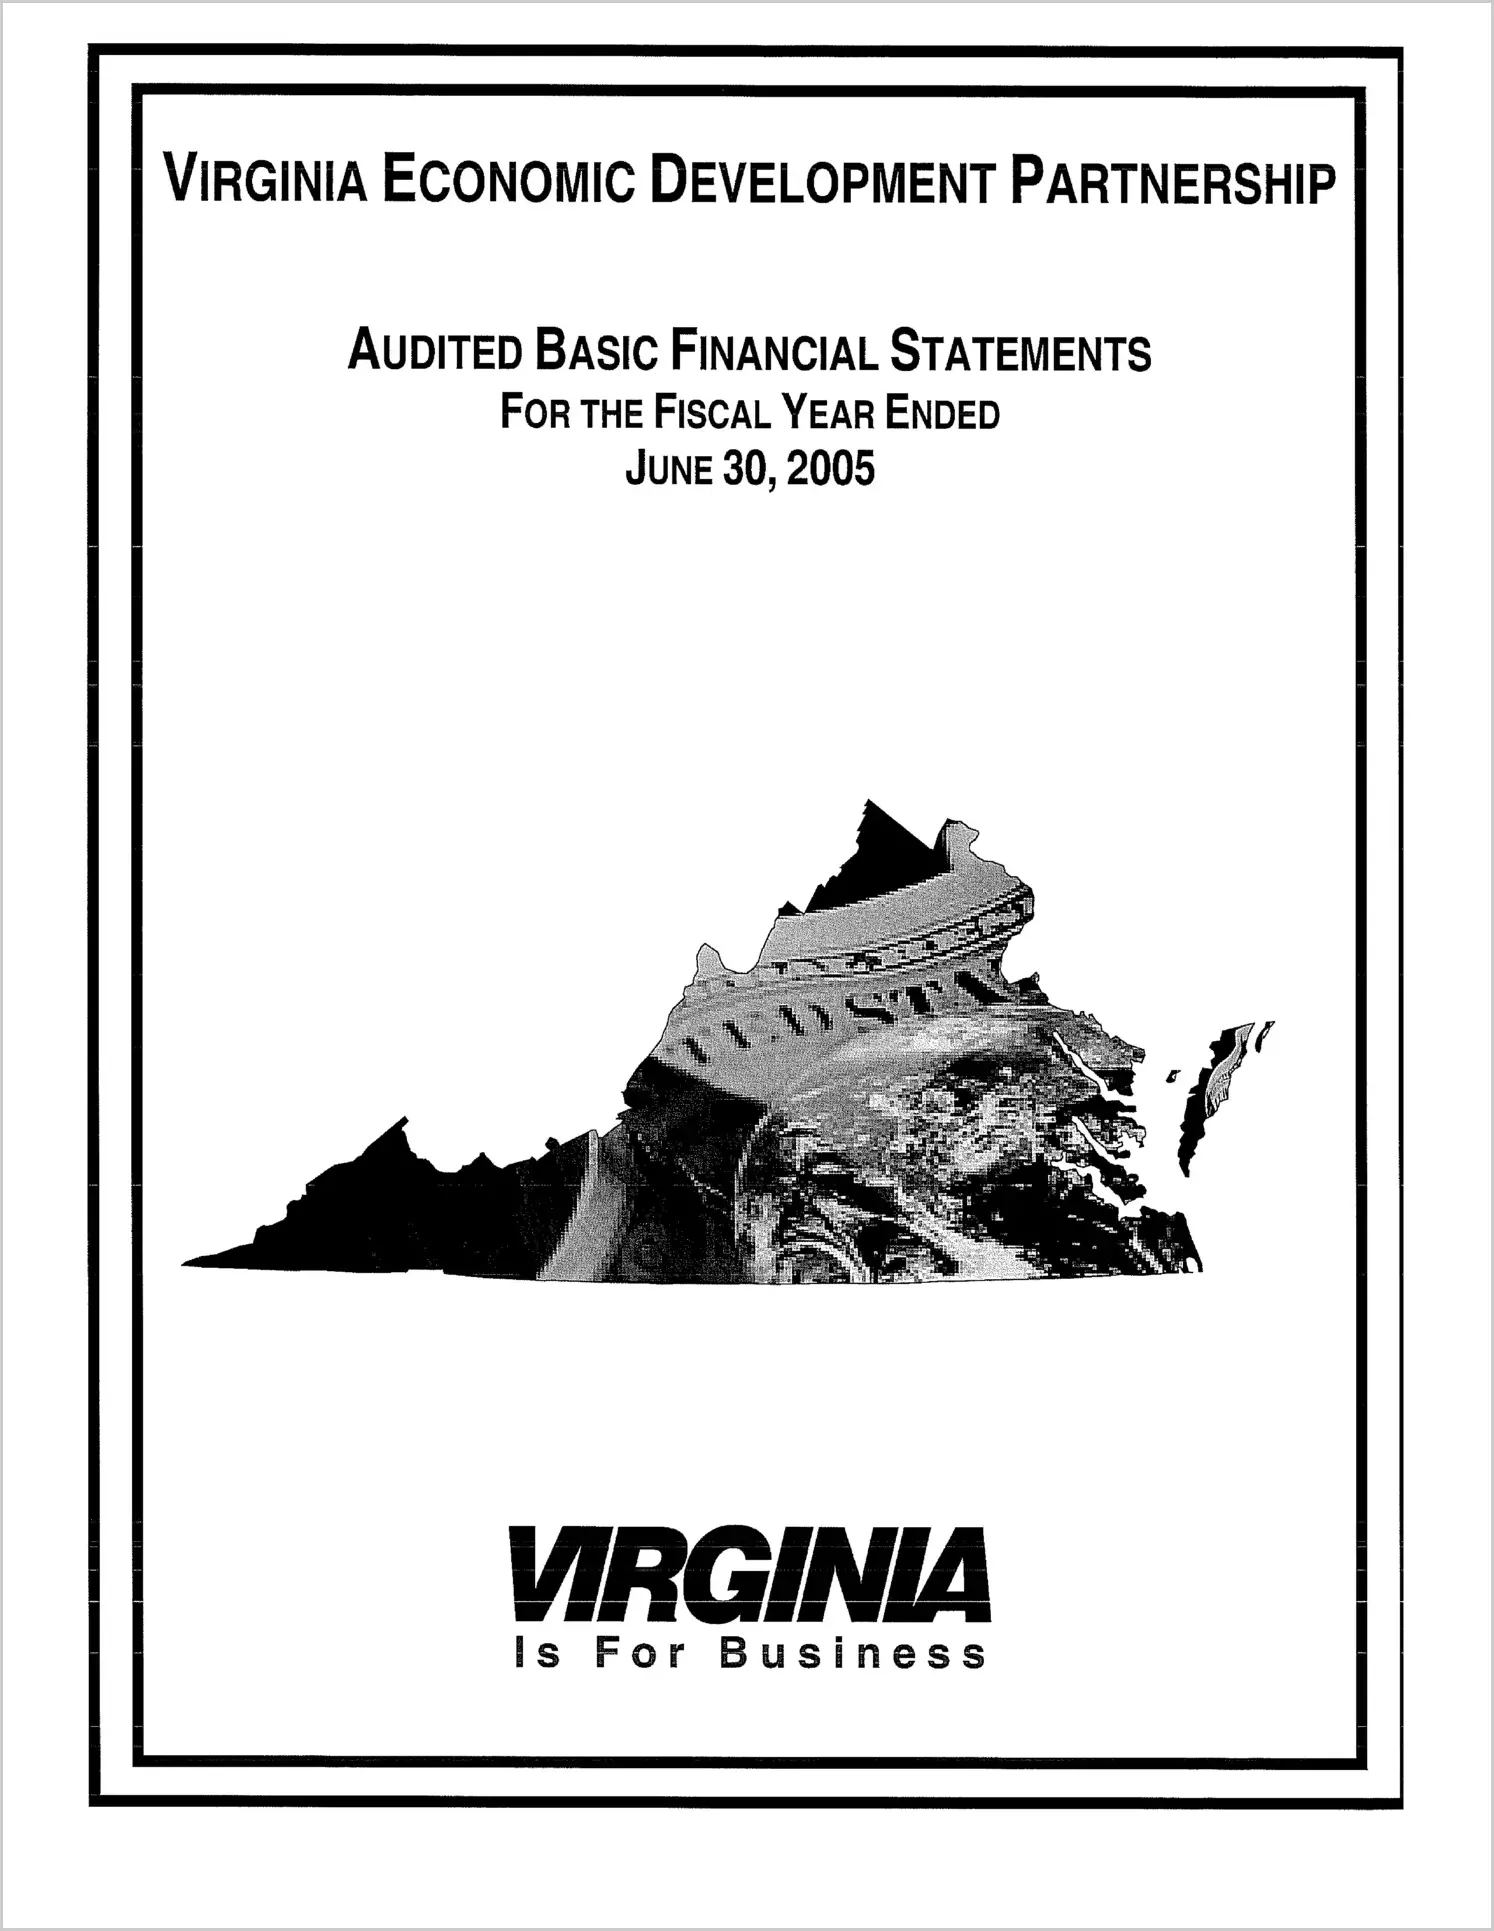 Virginia Economic Development Partnership Audited General Purpose Financial Statements for the year ended June 30, 2005